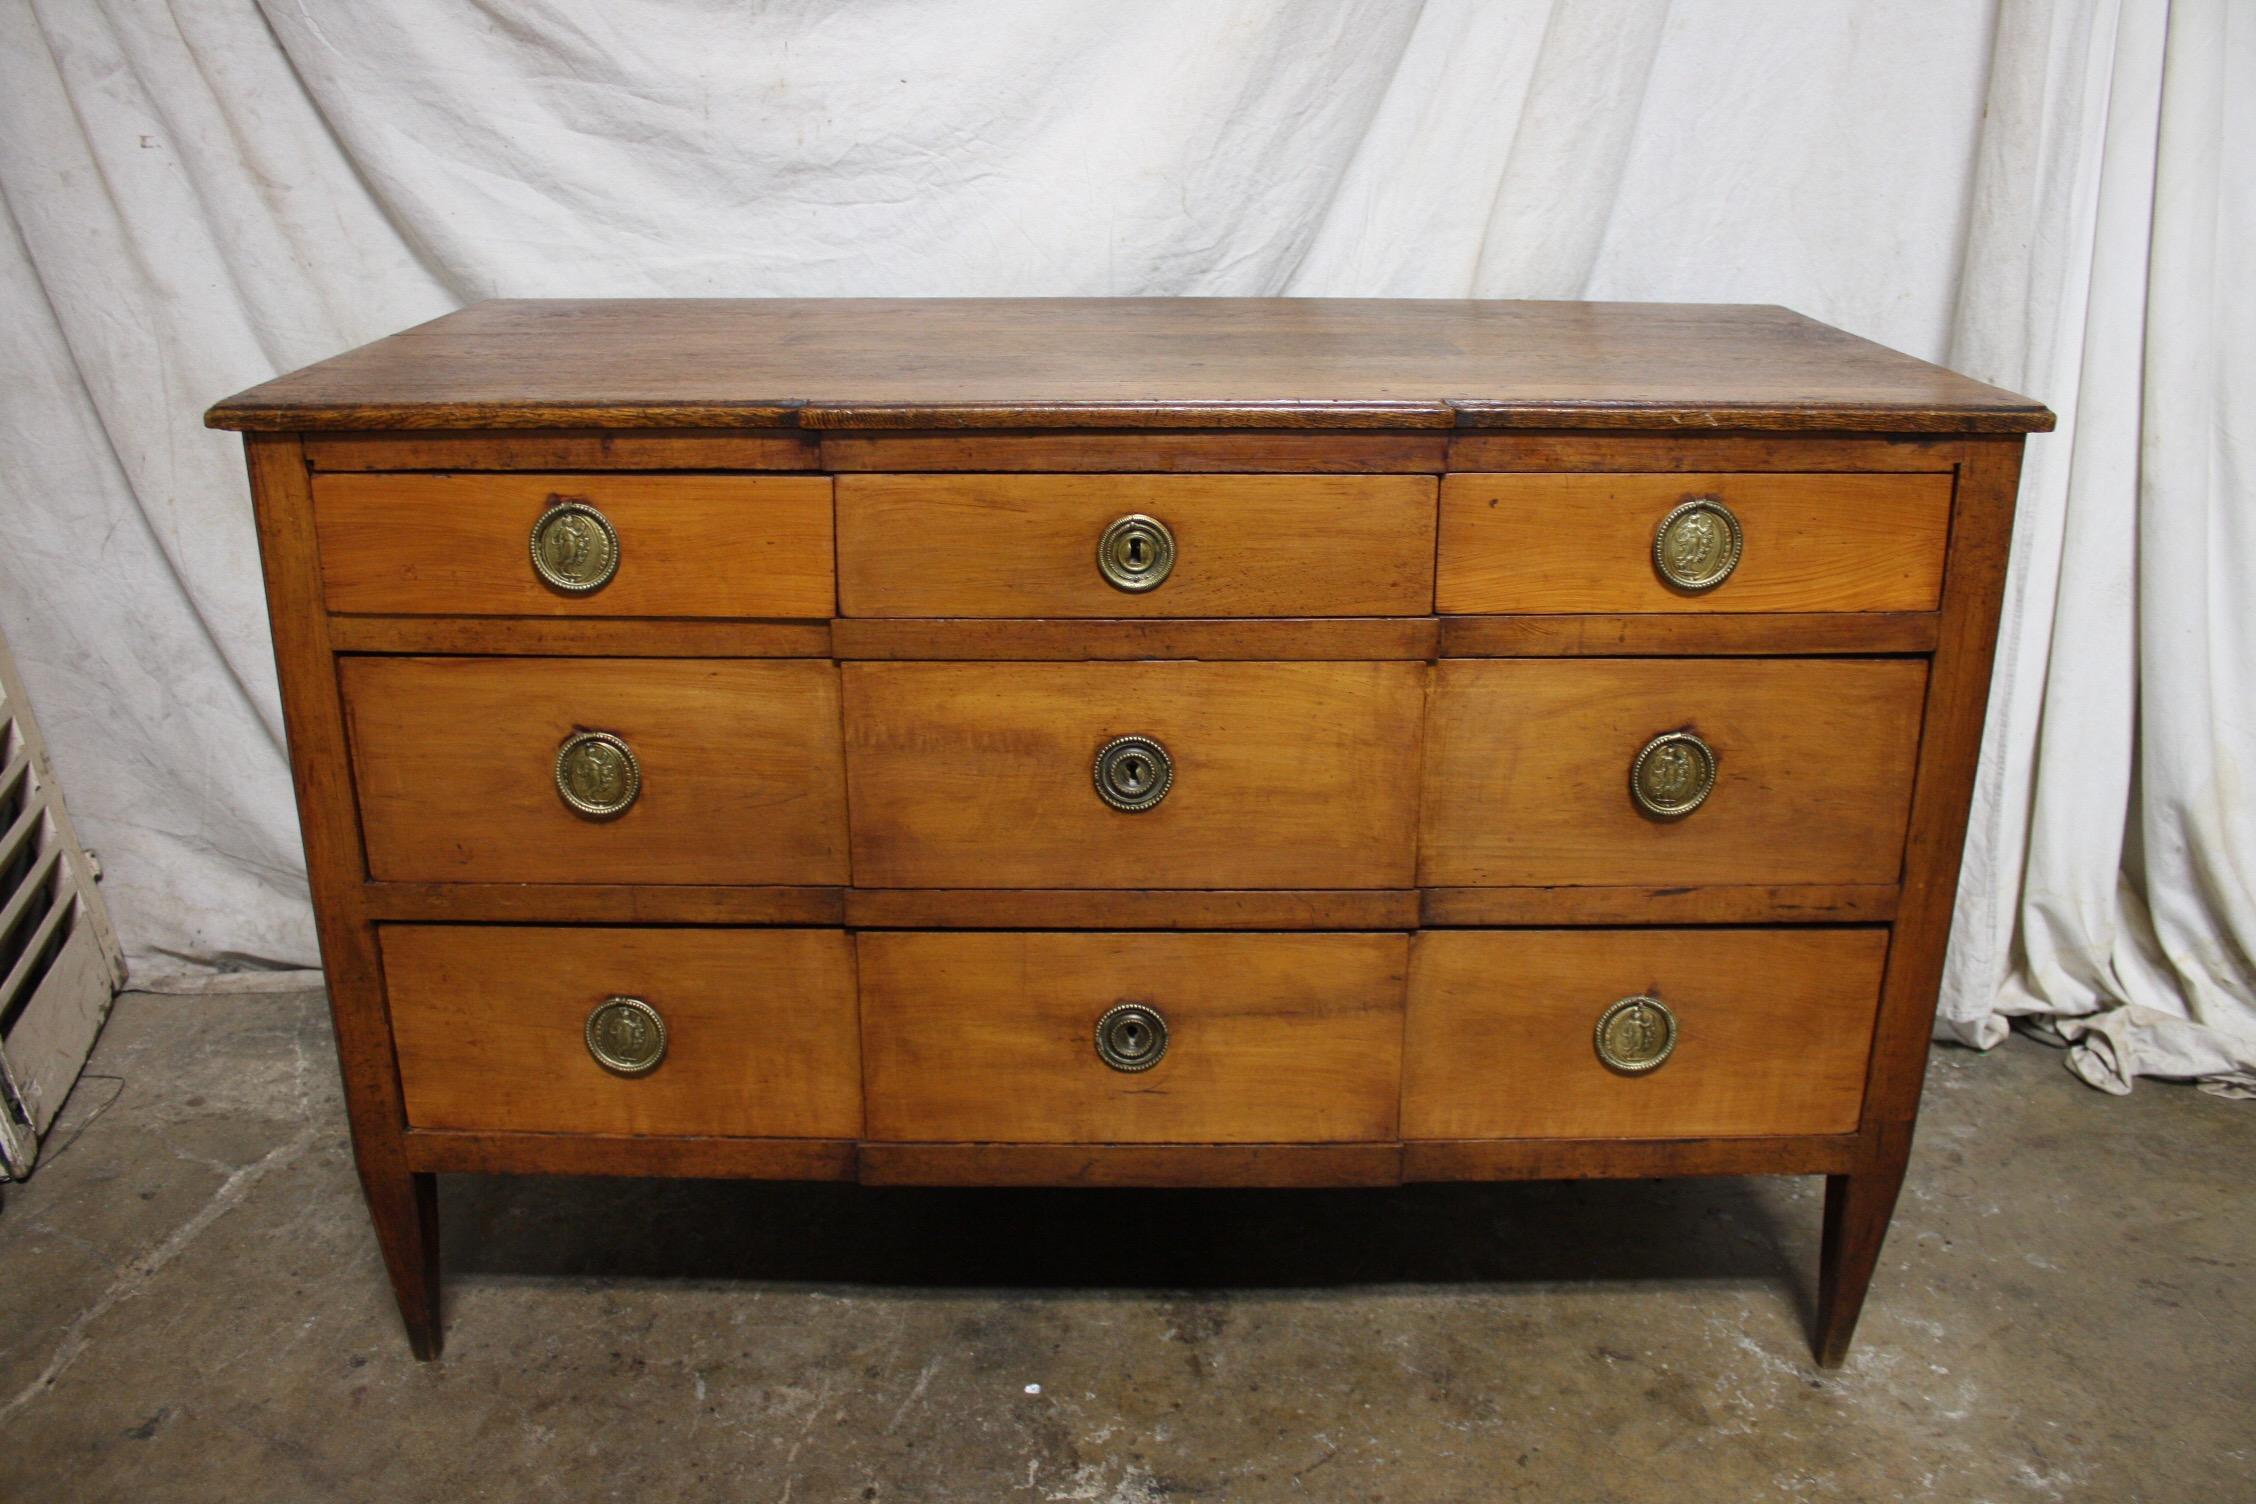 Amazing piece, It is made with 2 woods, the top and frames are in oak, the drawers and sides are in walnut. This chest is strong and powerful, it wears a lot of history and you feel it when you look at it. Very nice line on the drawers with a square